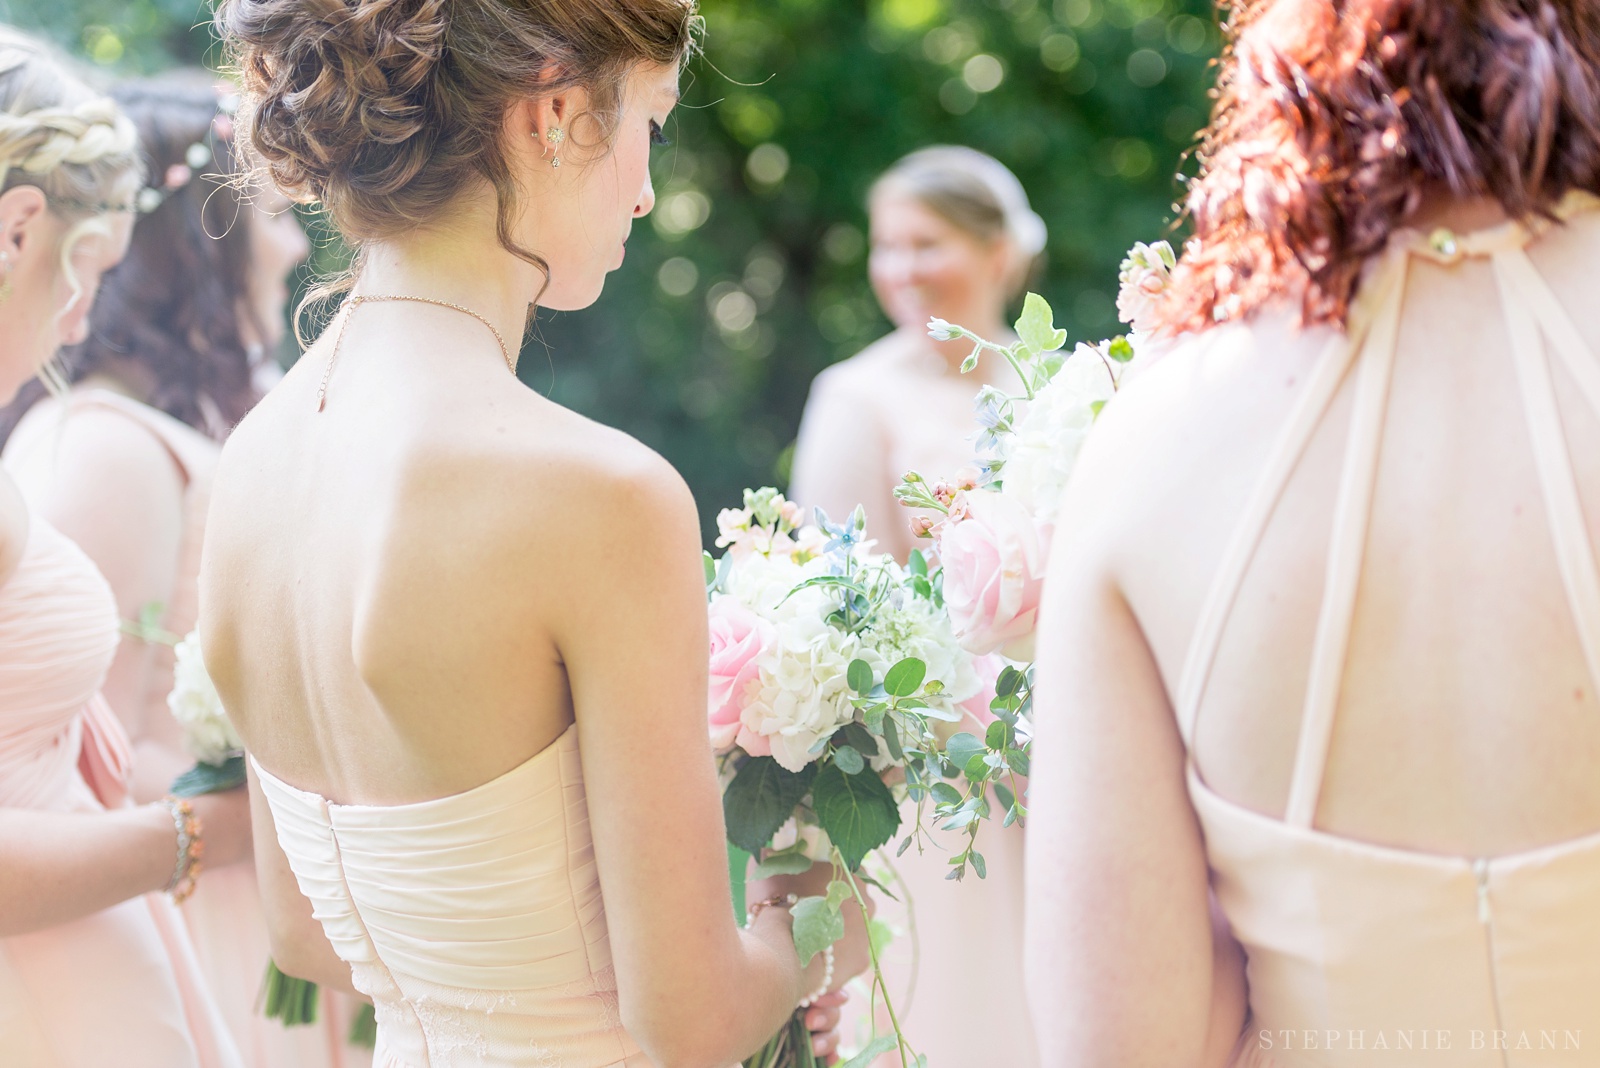 wedding-details-of-the-bridesmaids-flowers-outdoors